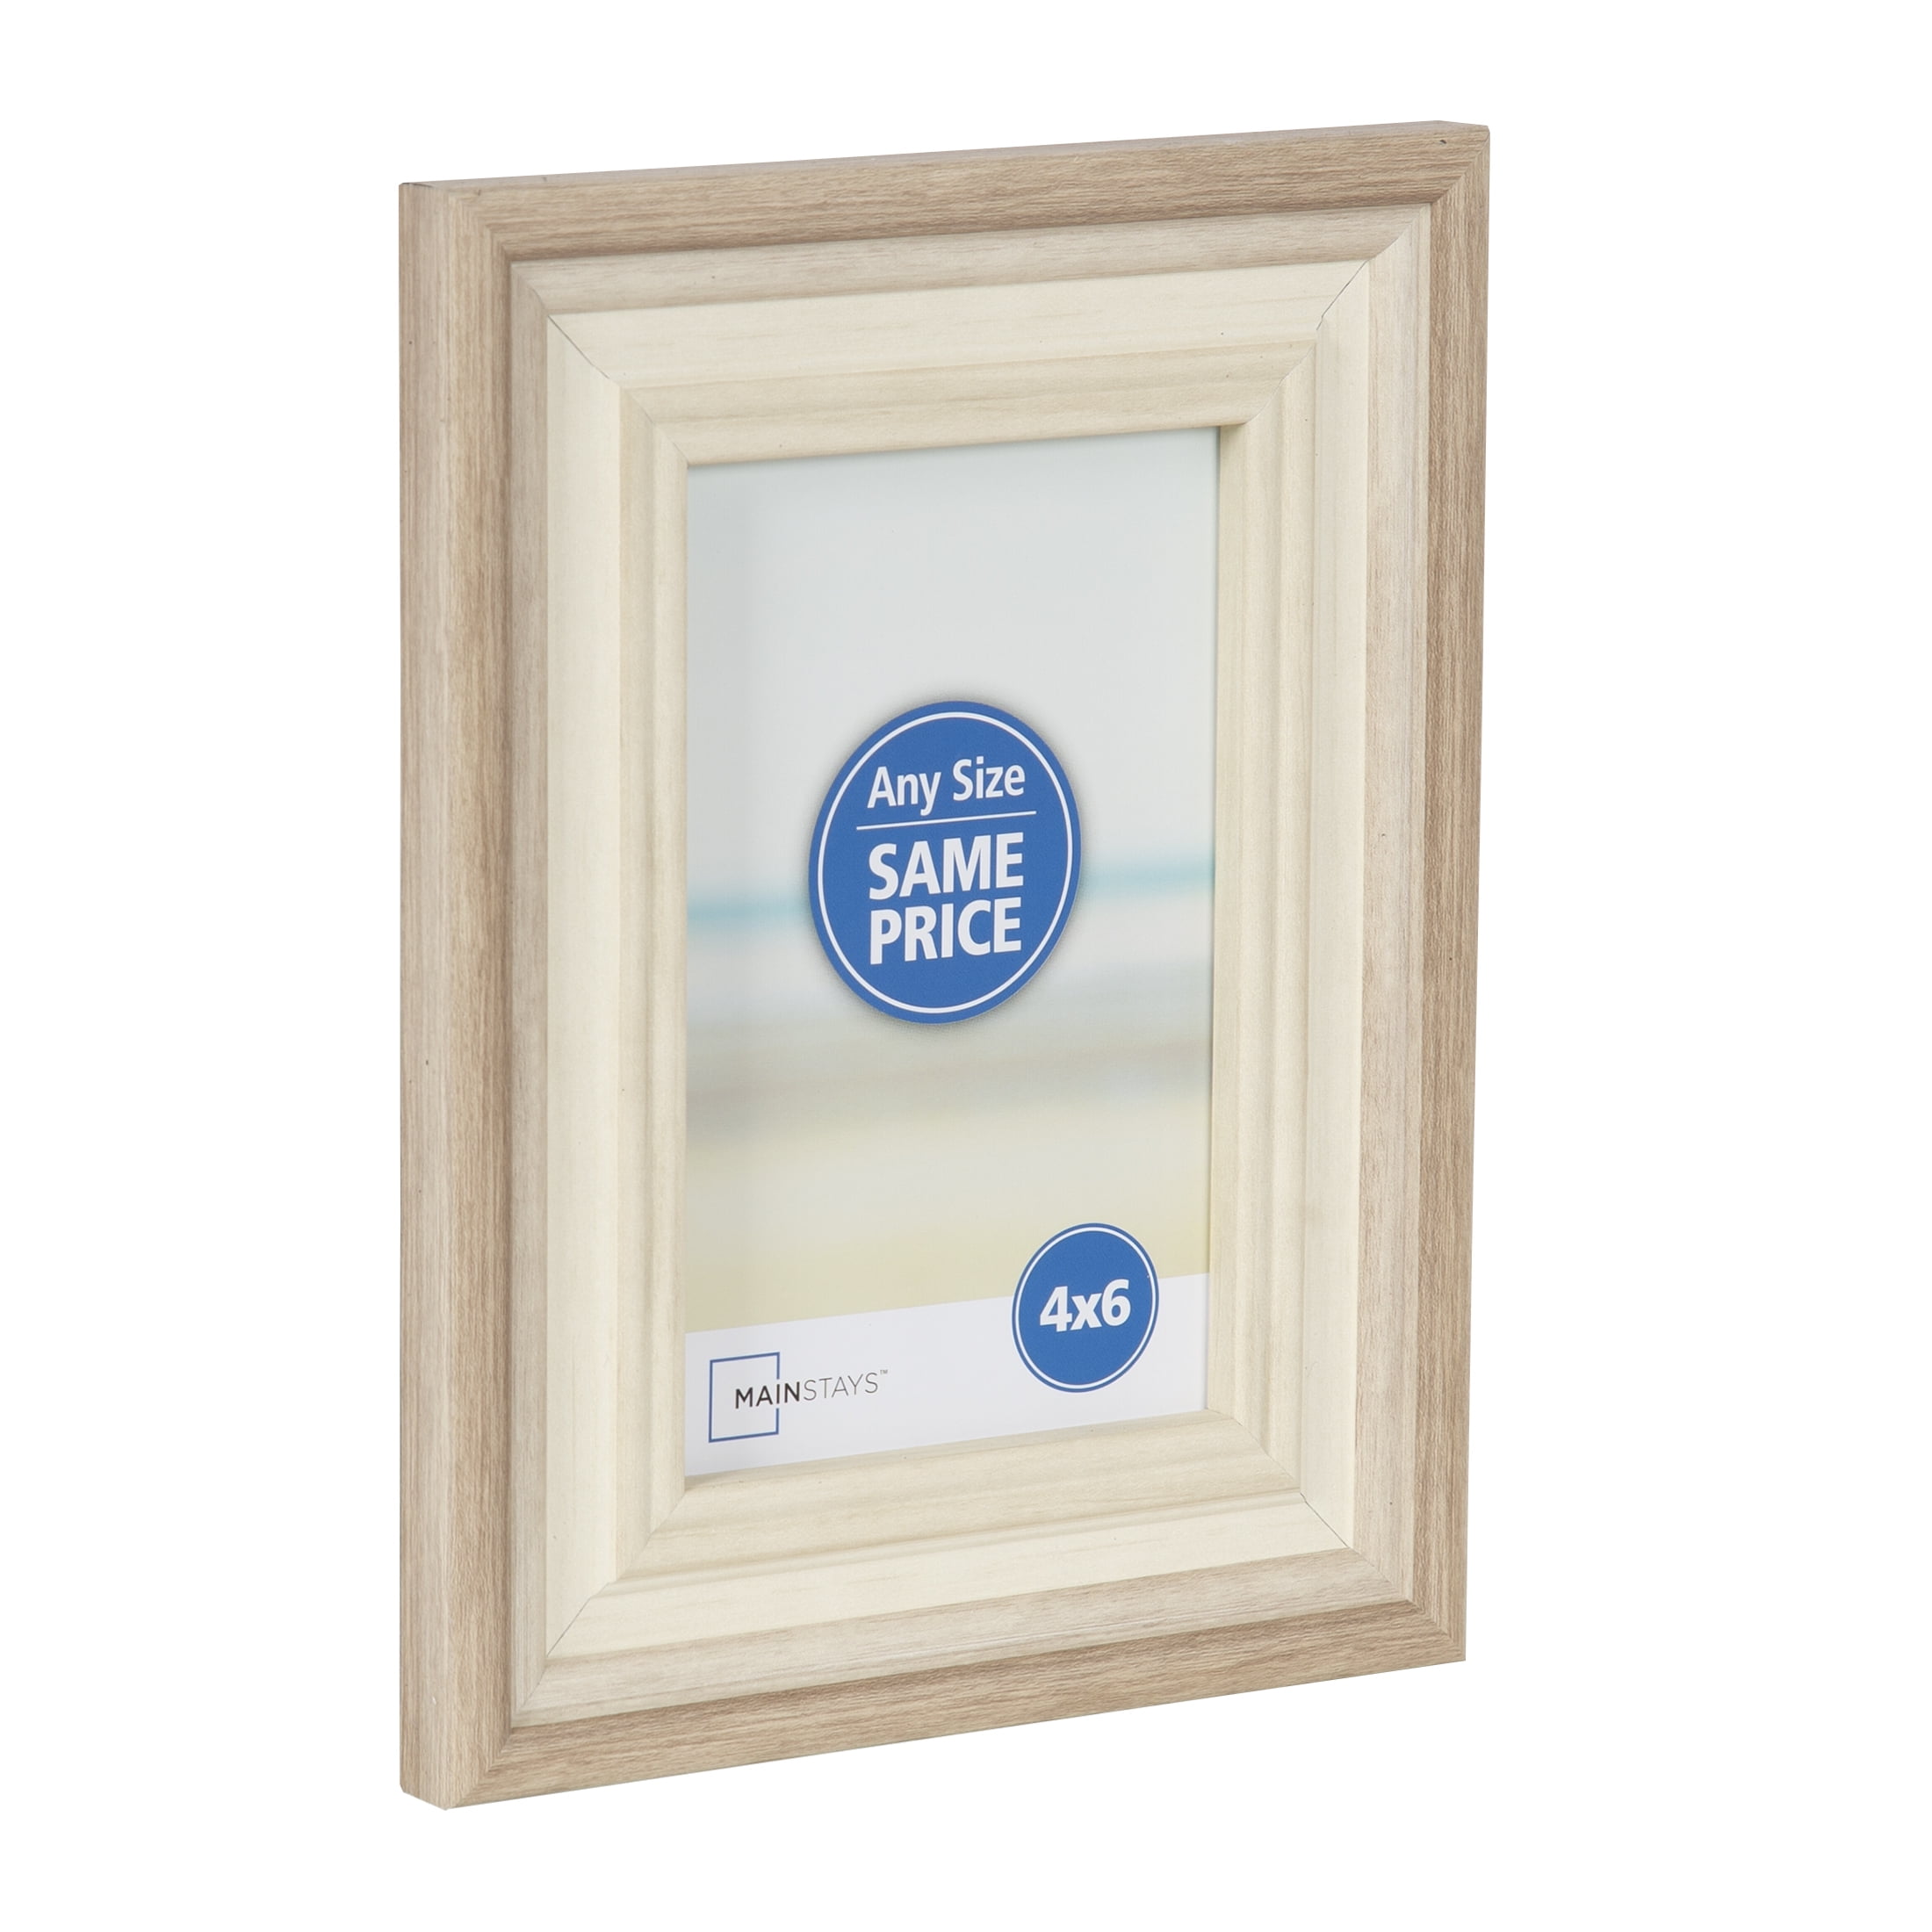 Pungent Earth Tones Picture Frame - 2 4x6 photos